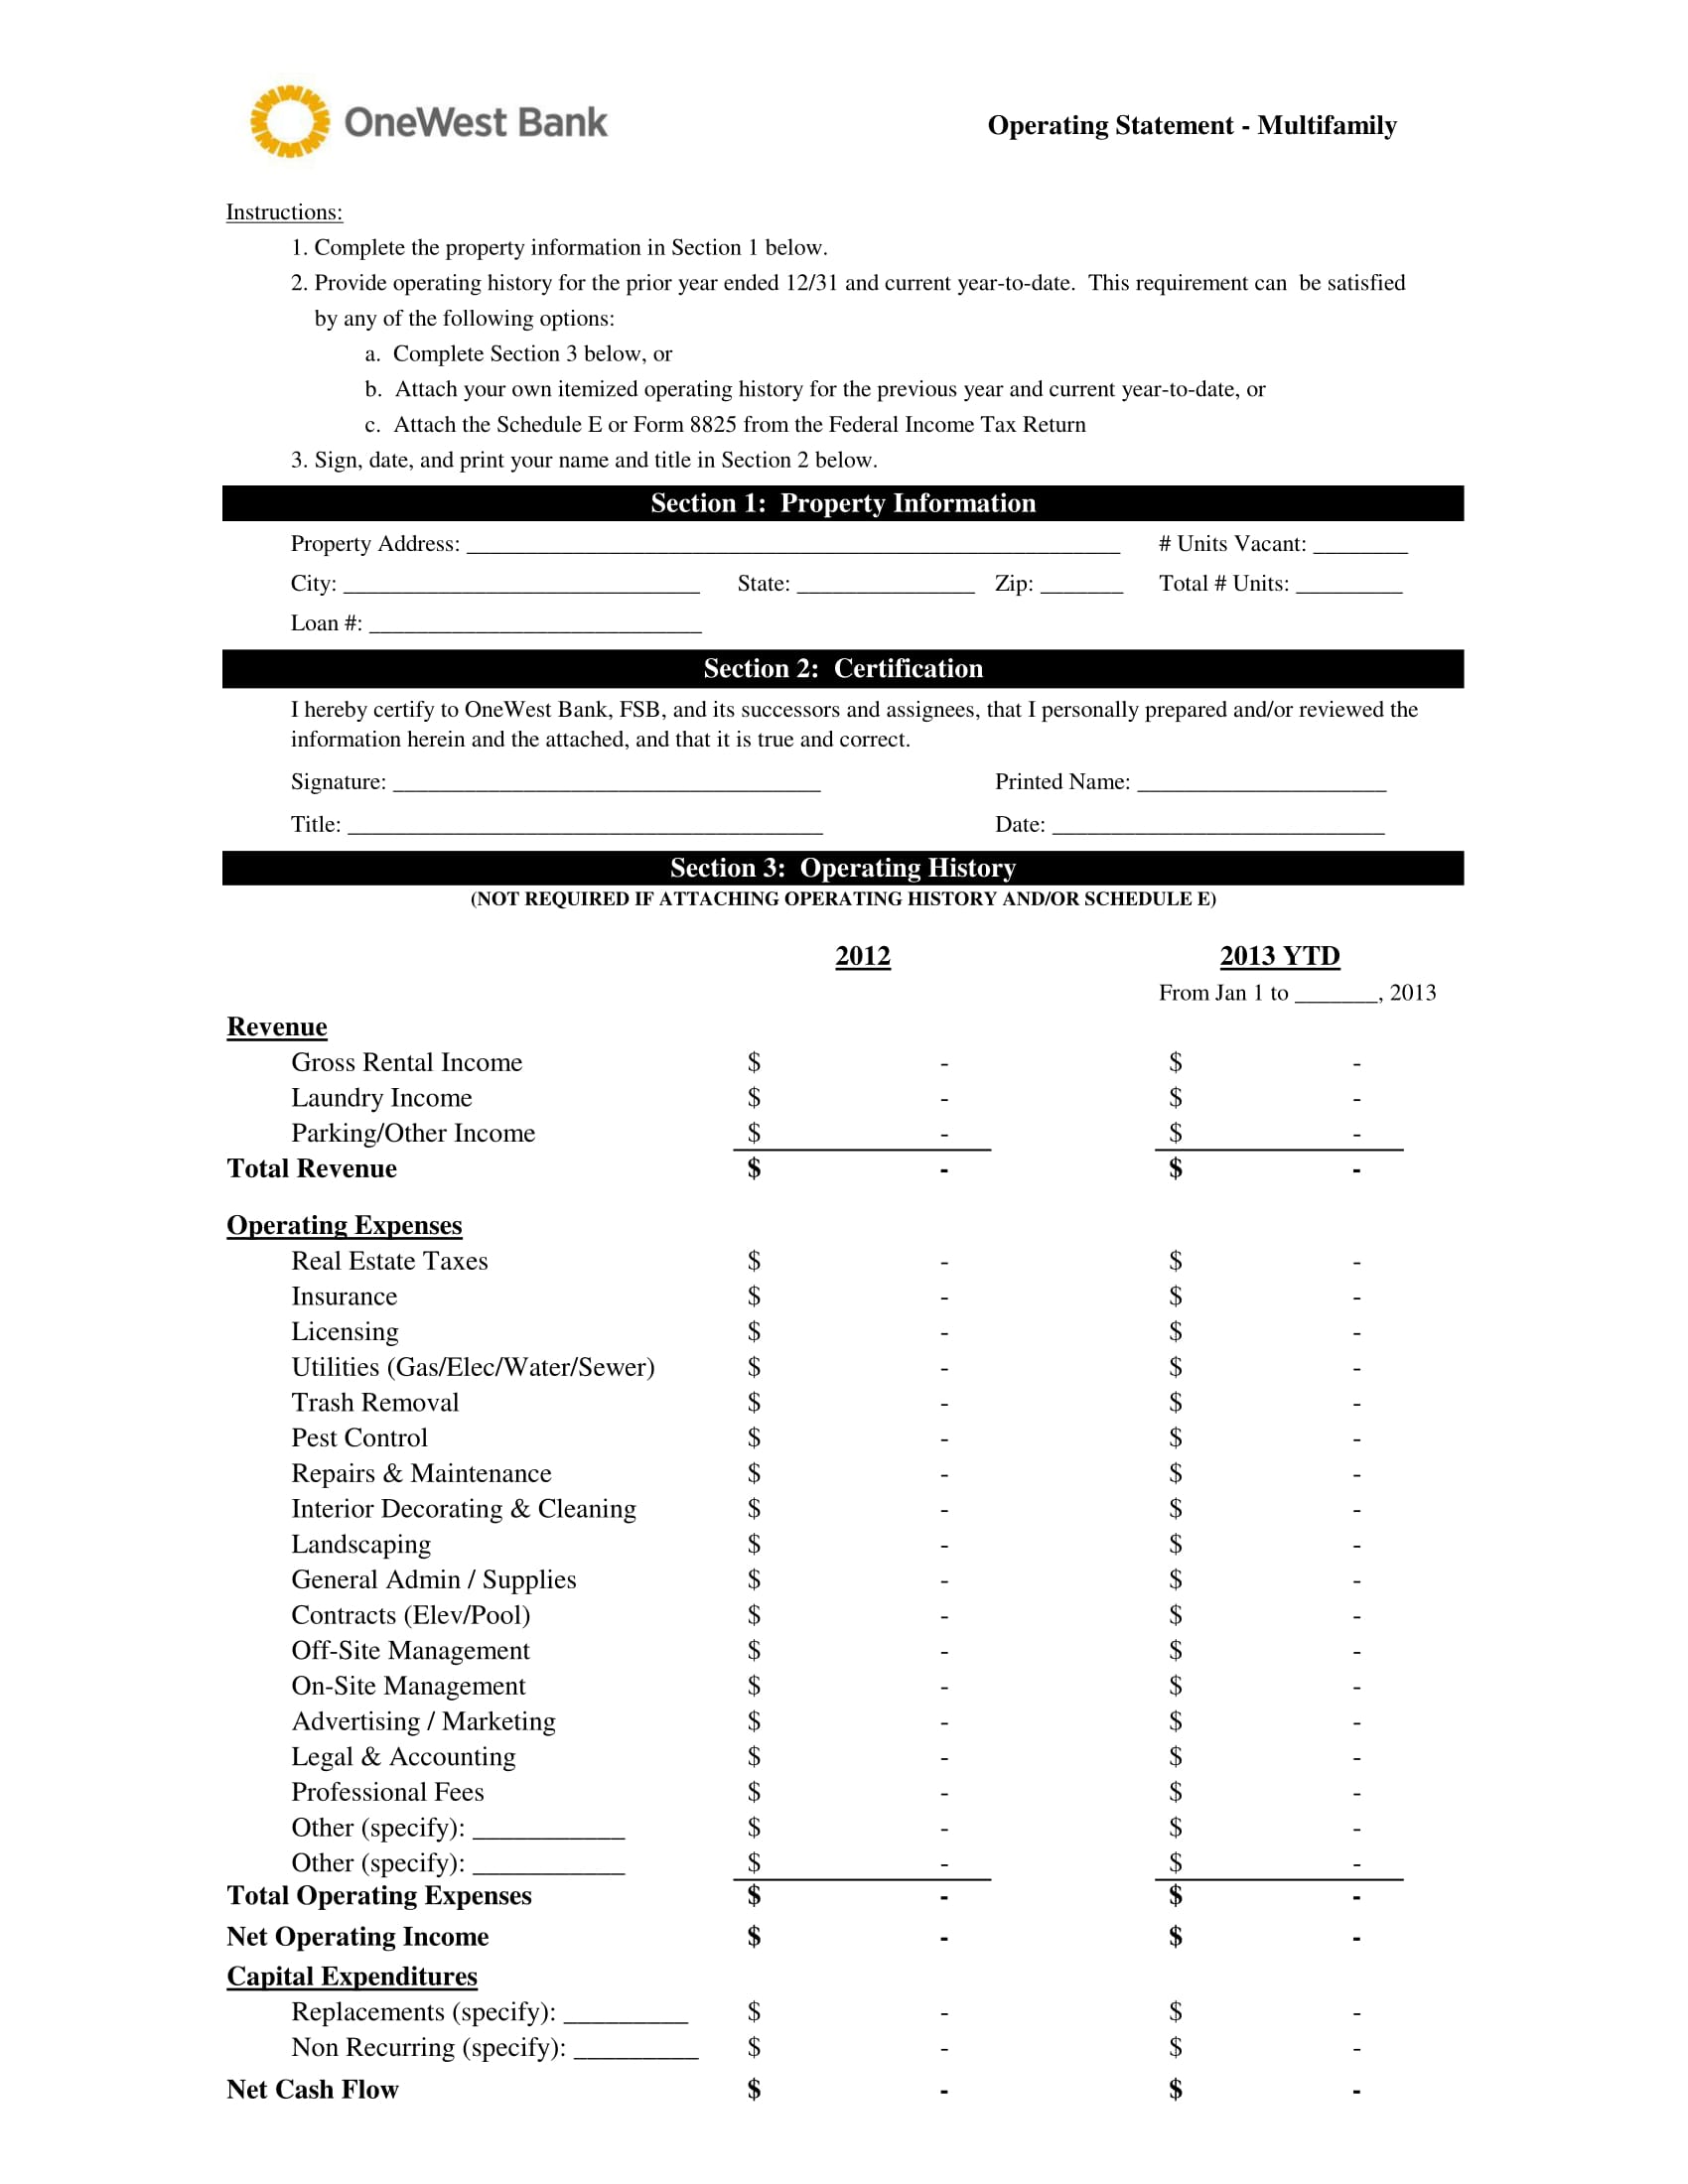 multifamily operating statement form 1